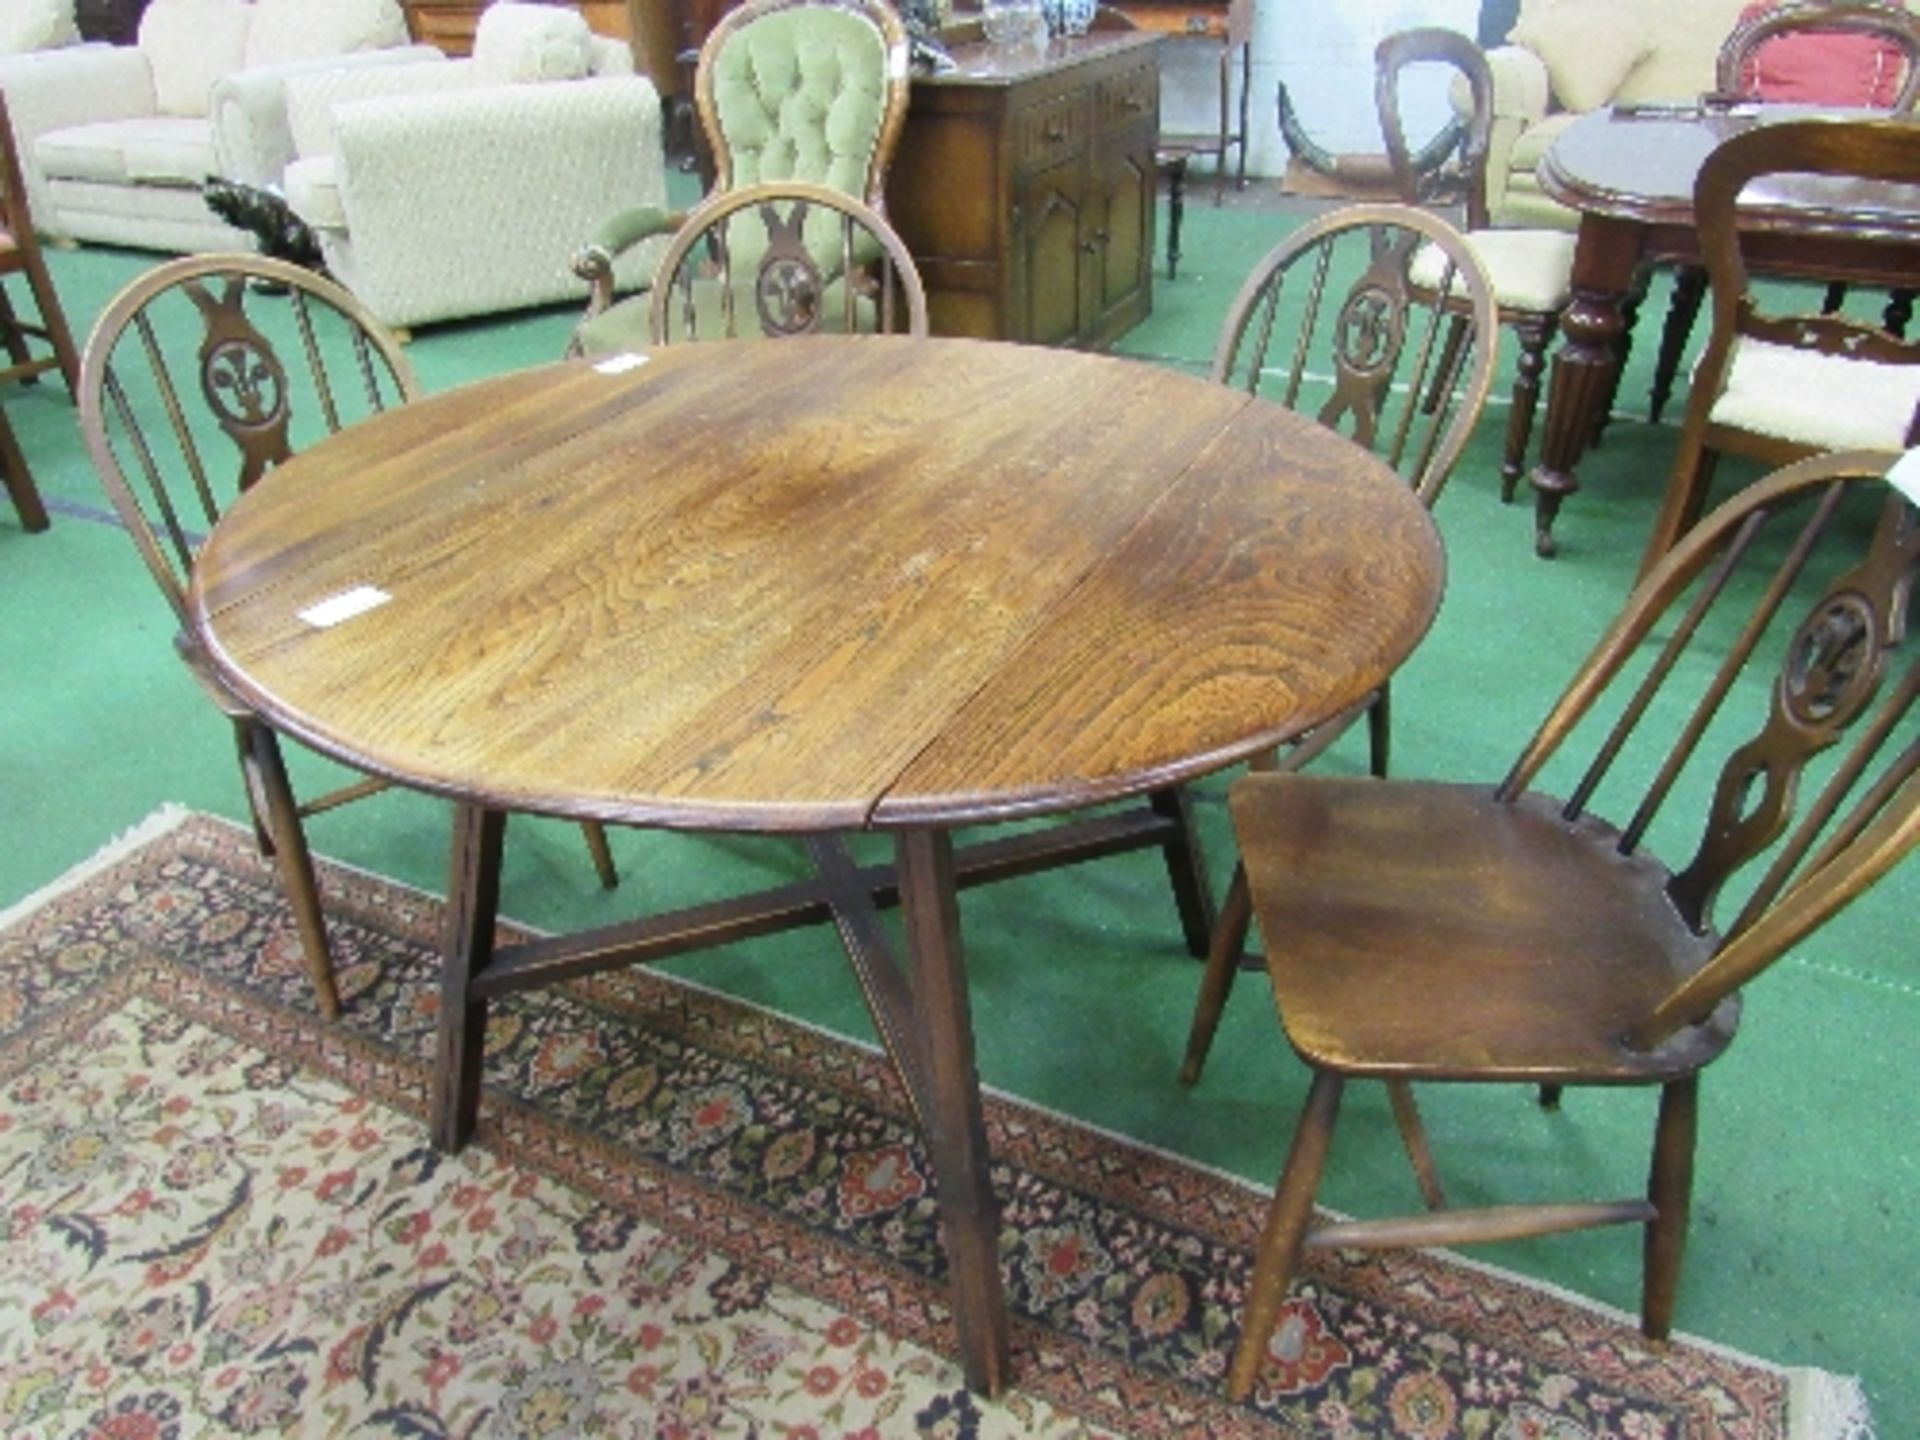 Ercol "Old Colonial" drop-side table with cross stretcher, 107cms diameter (open) x 71cms, with 4